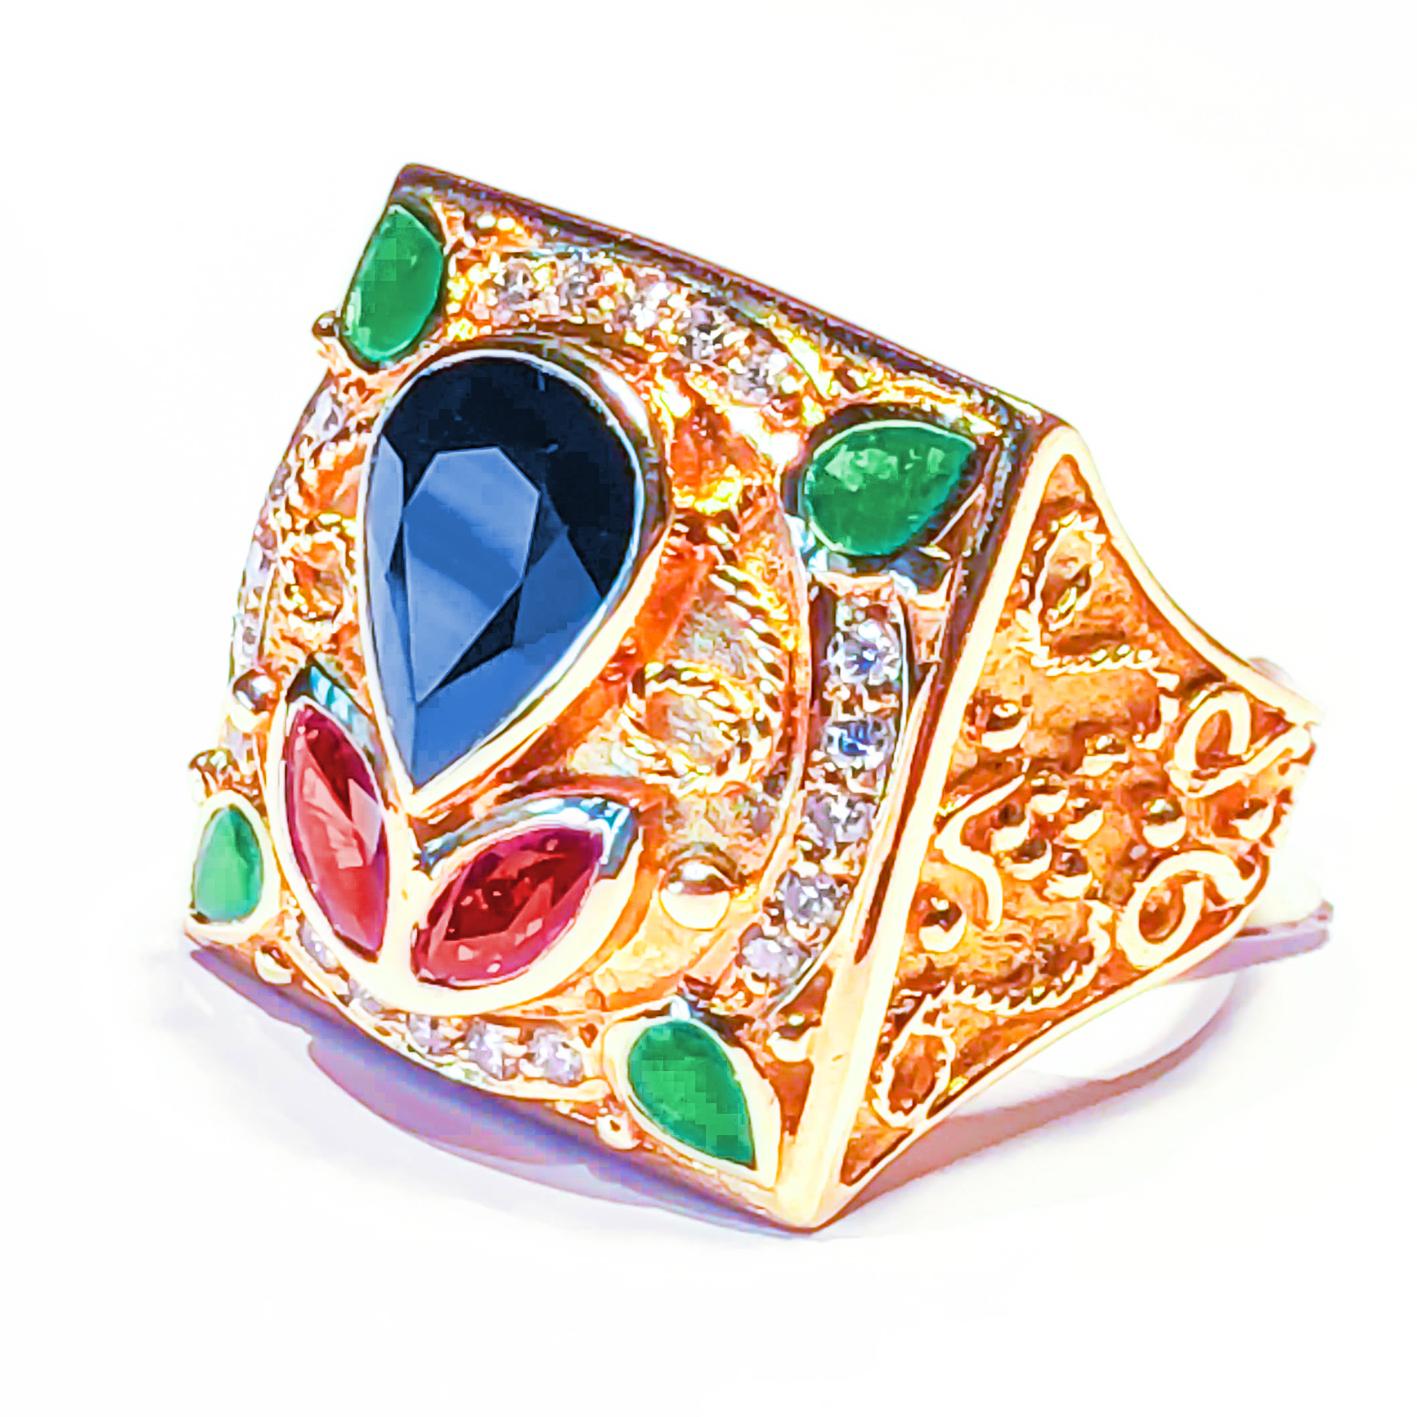 Byzantine Georgios Collections 18 Karat Yellow Gold Sapphire Ring with Emeralds and Rubies